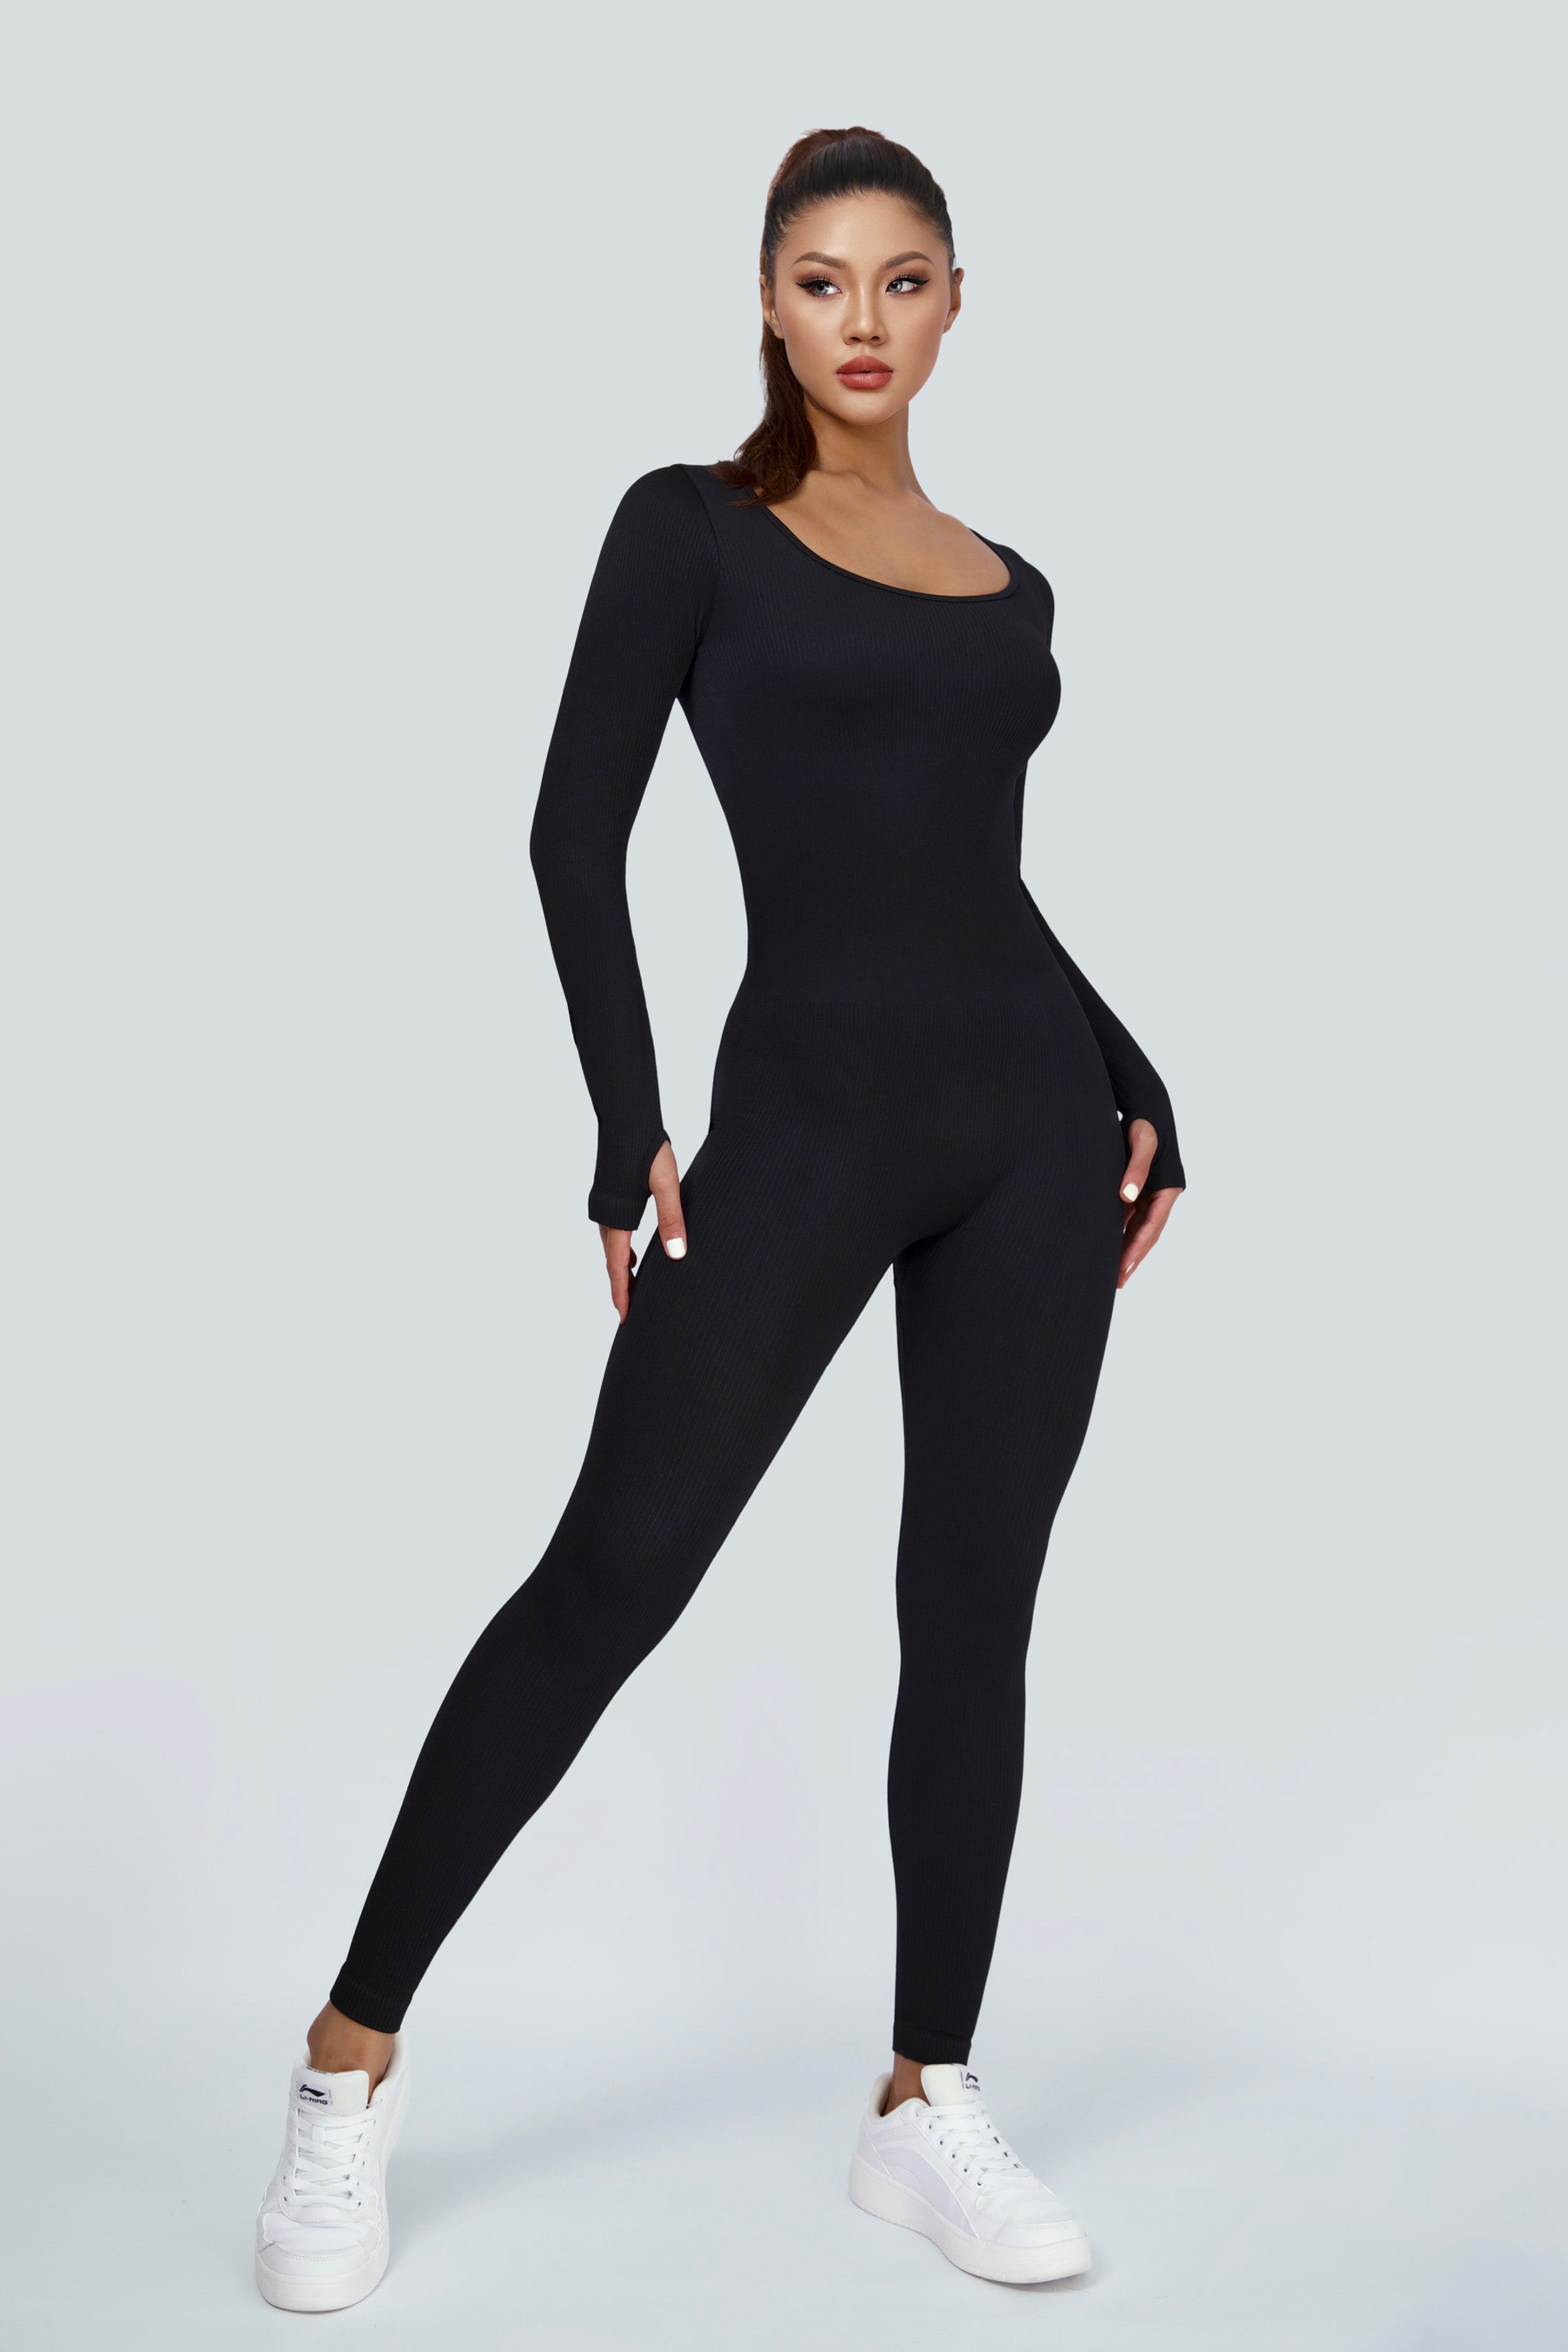 solacol Womens Ribbed Jumpsuits Ribbed Workout Rompers Long Sleeve